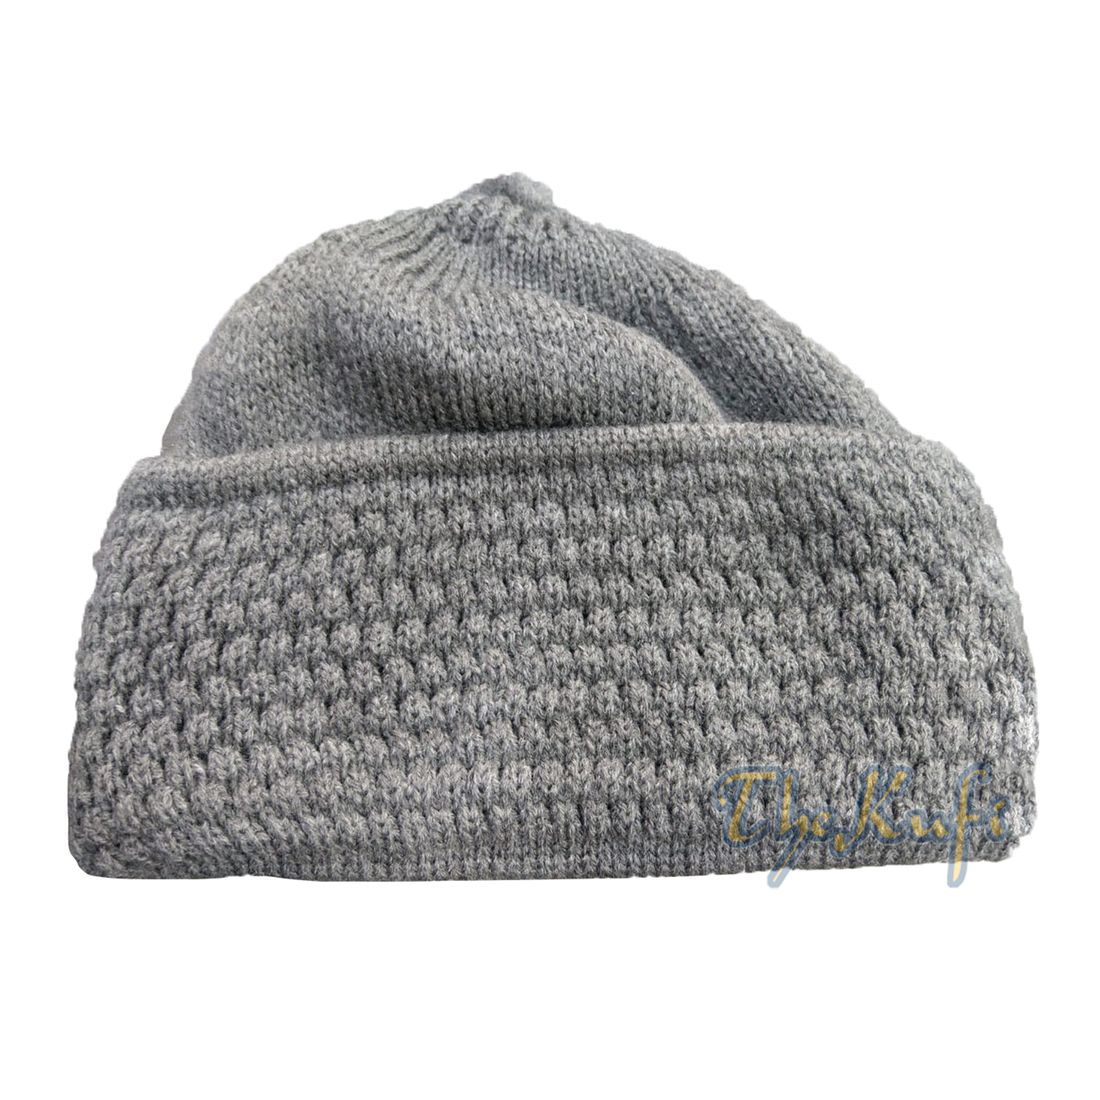 One-size Gray Thick-weave Stretchy Double Layer Warm Cotton-acrylic Beanie Hat with Pompom